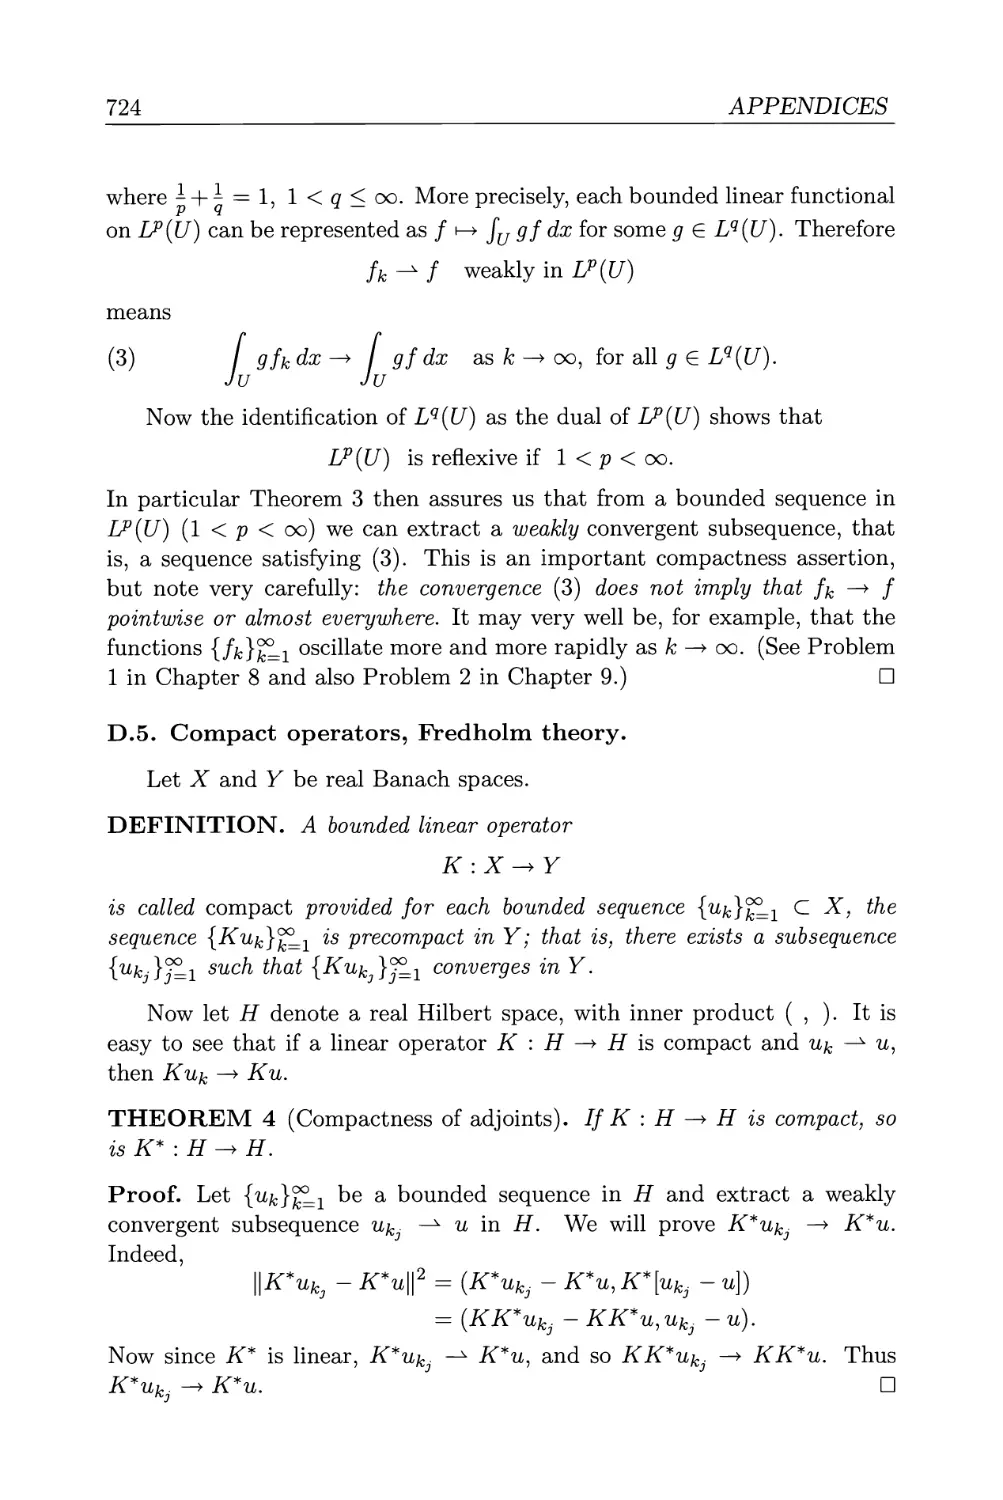 D.5. Compact operators, Fredholm theory